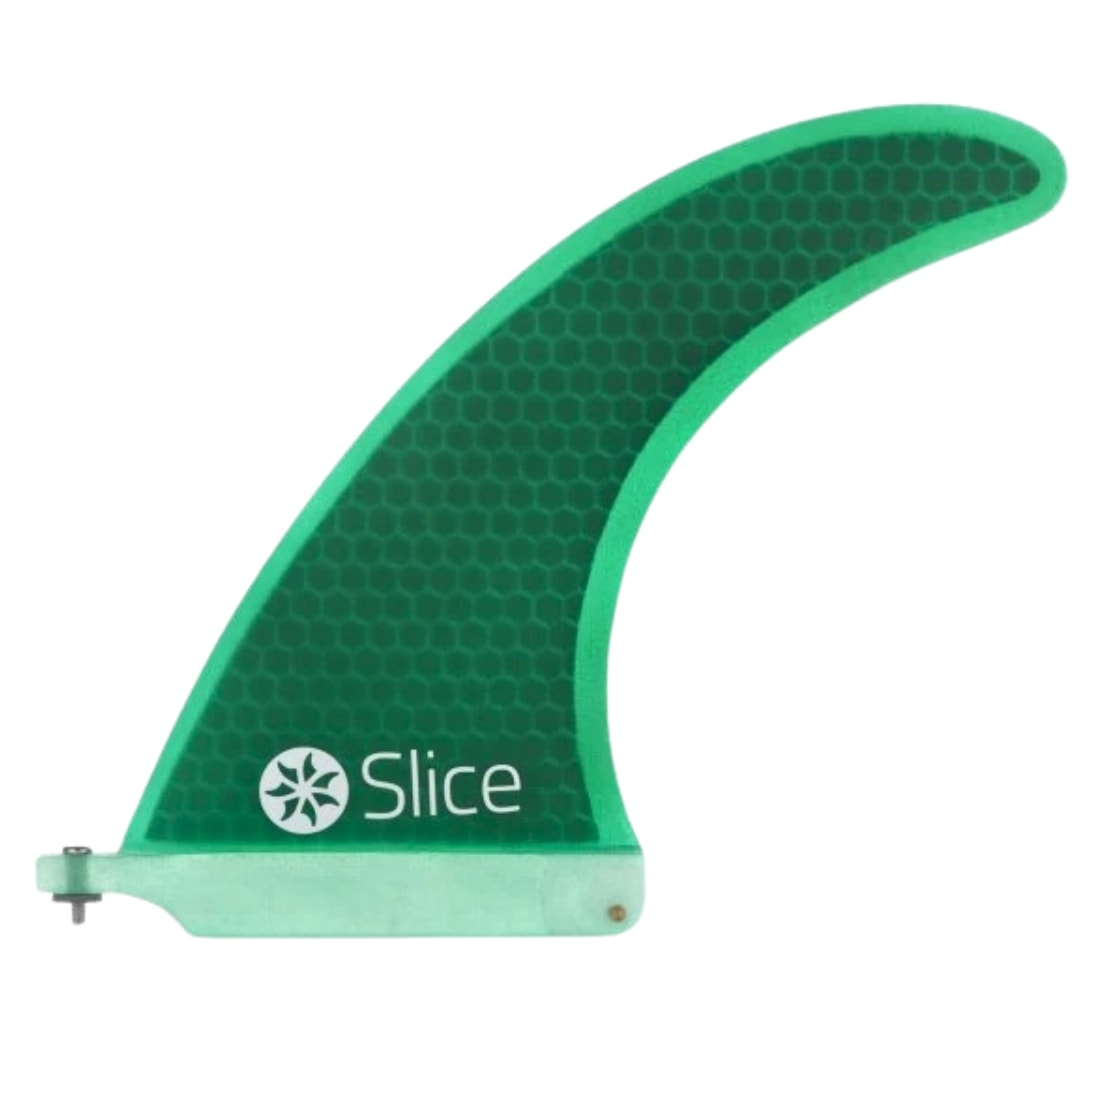 Northcore RTM Hexcore 9" Longboard Surfbord Centre Fin - Green - Longboard/Single Fin by Northcore 9 inch